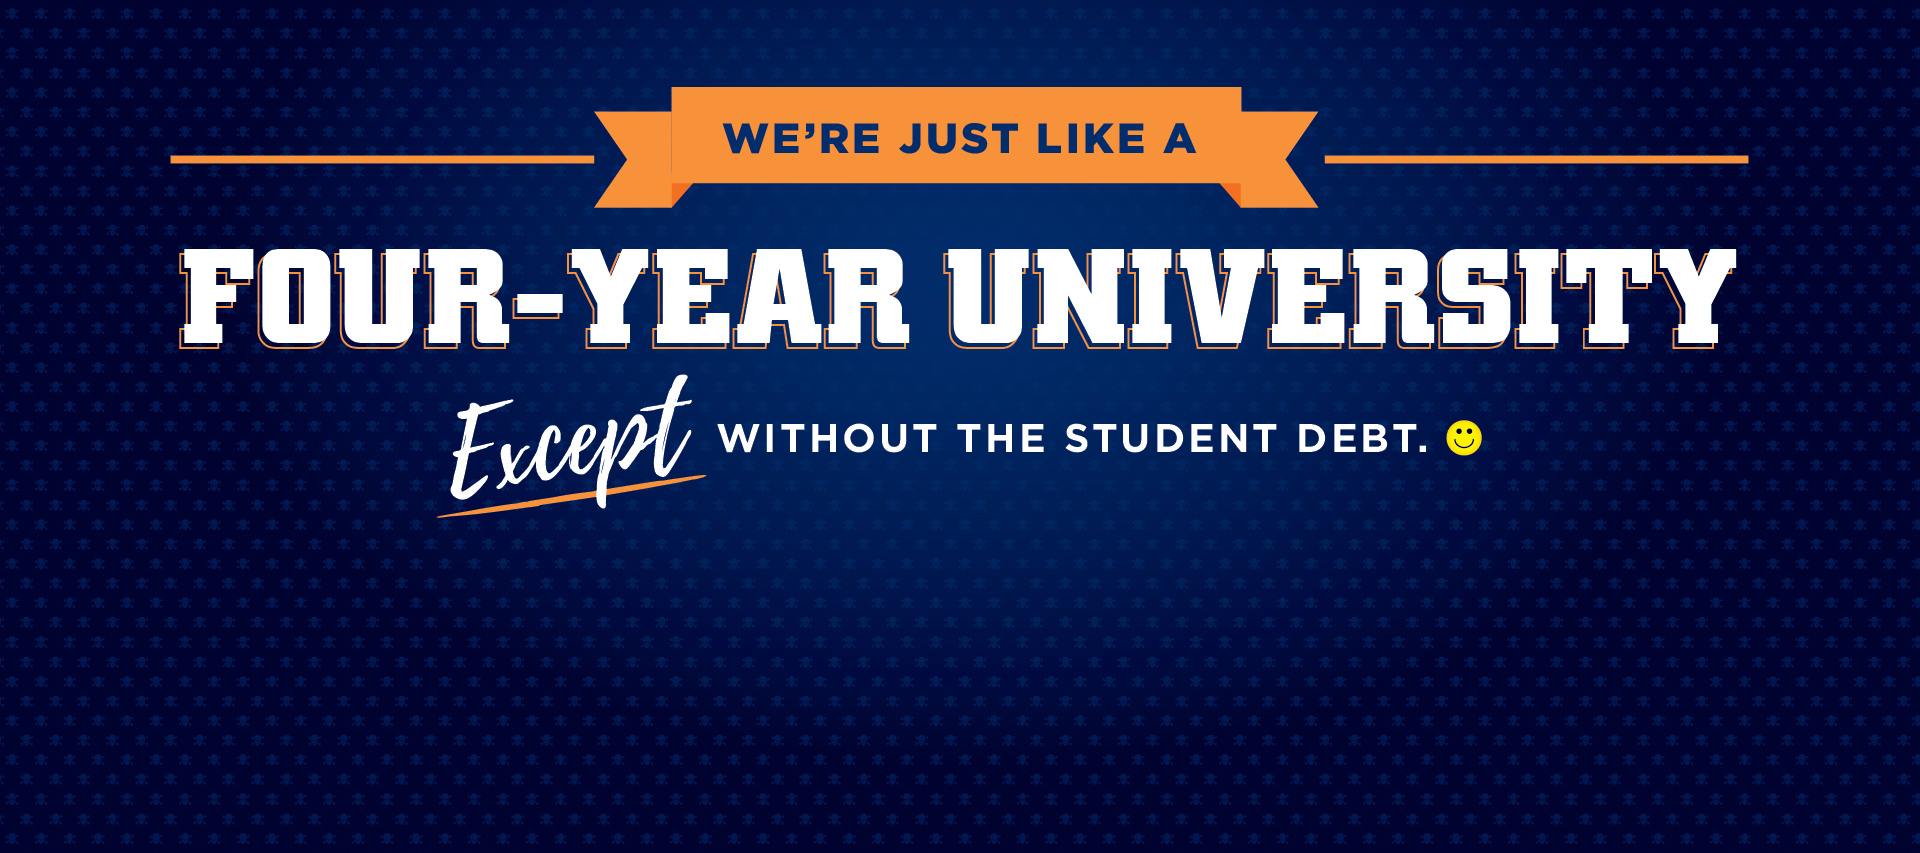 Text: We're just like a 4-year university except without the student debt.